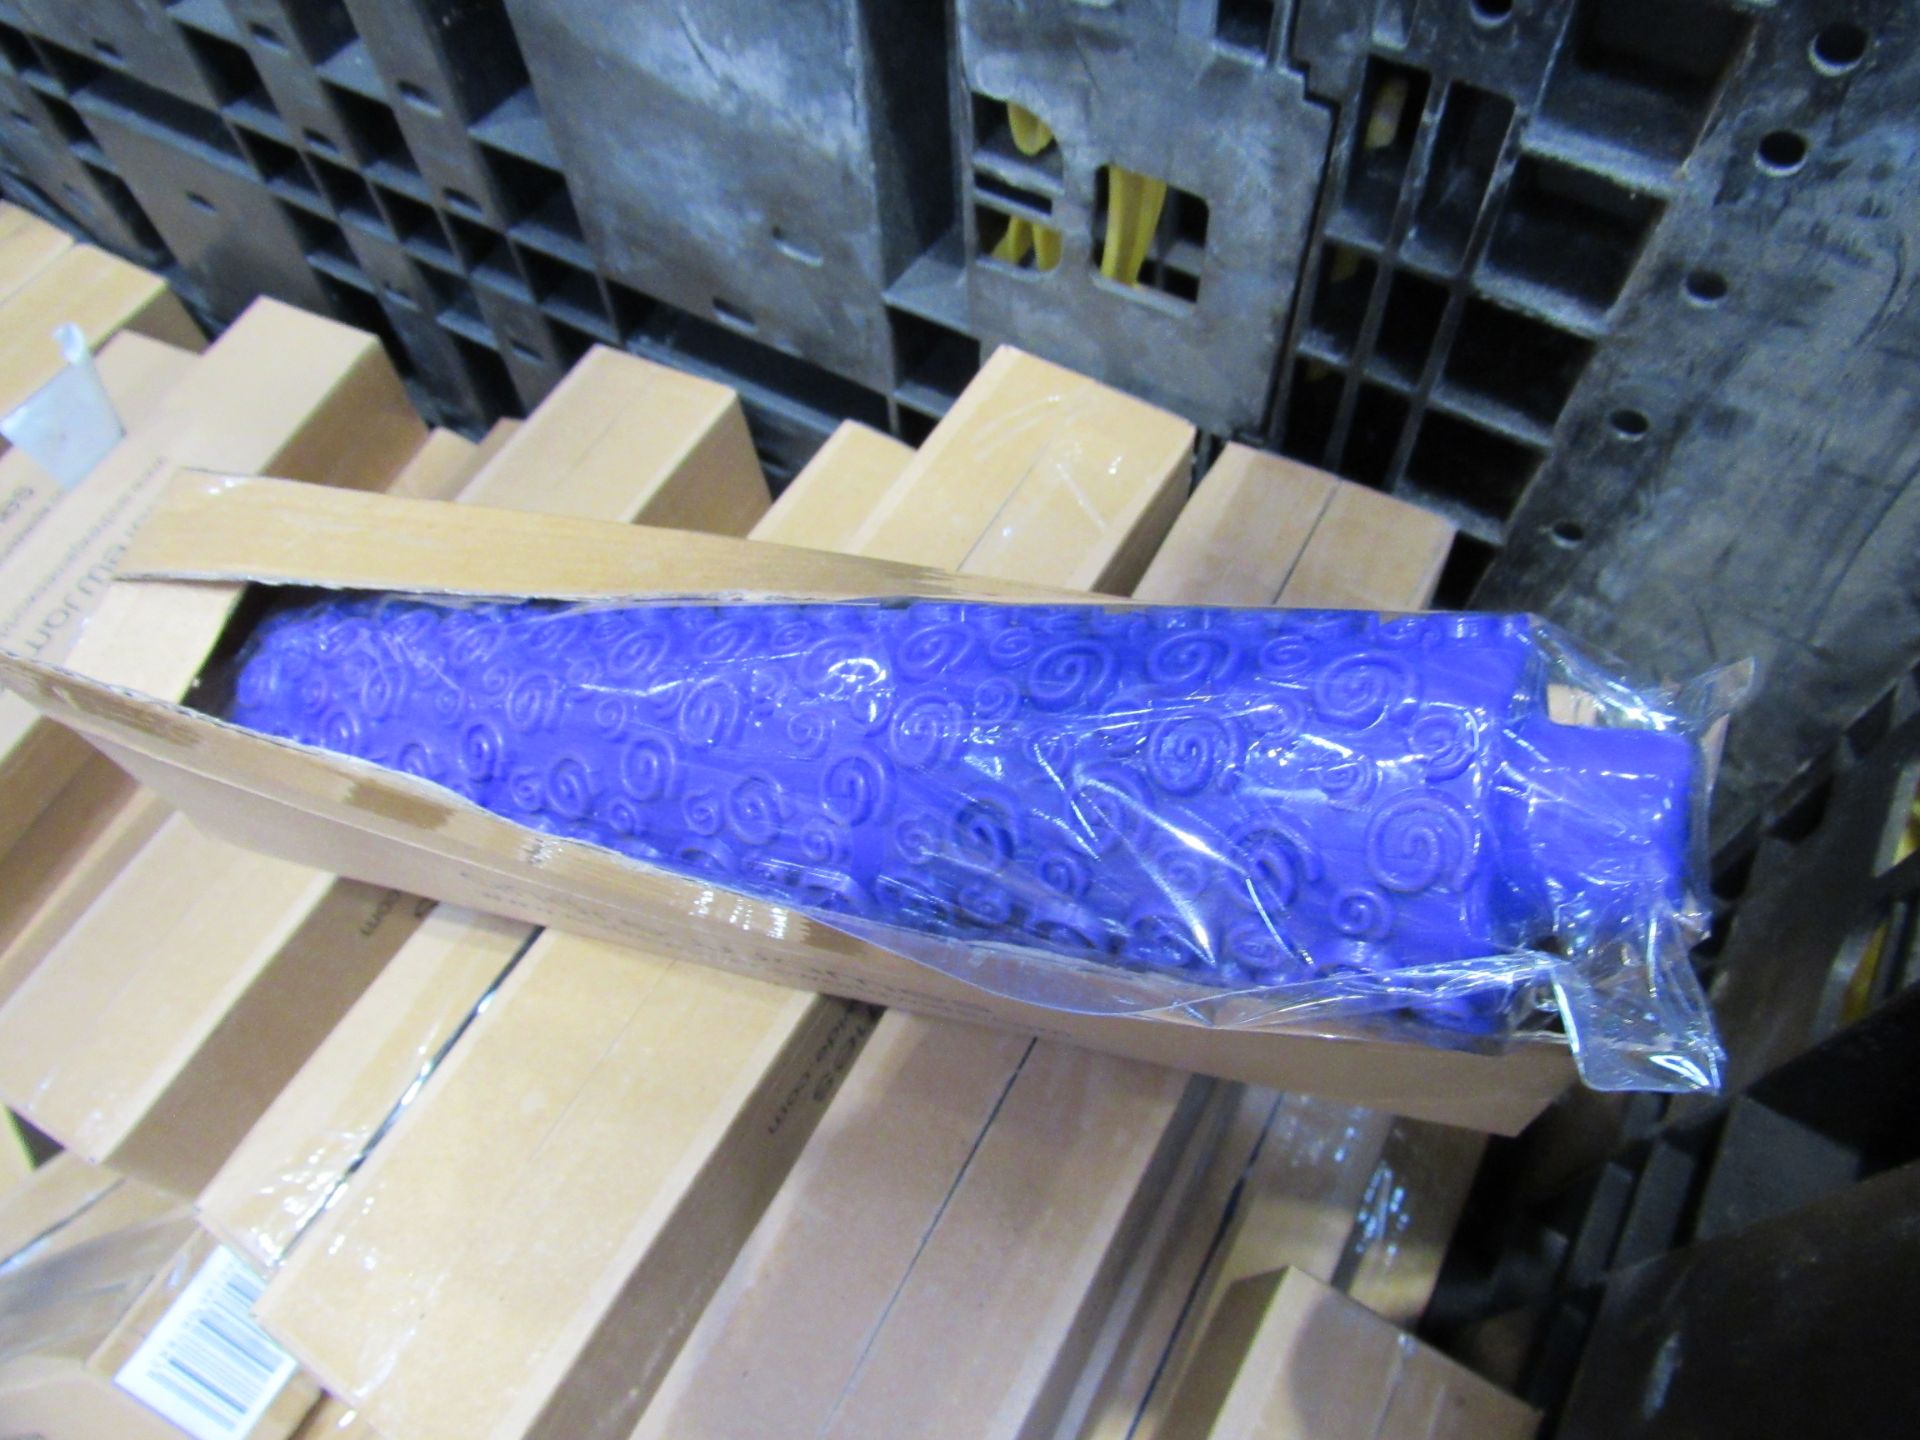 Large Quantity Impression Rolling Pins to Stillage - Image 2 of 3